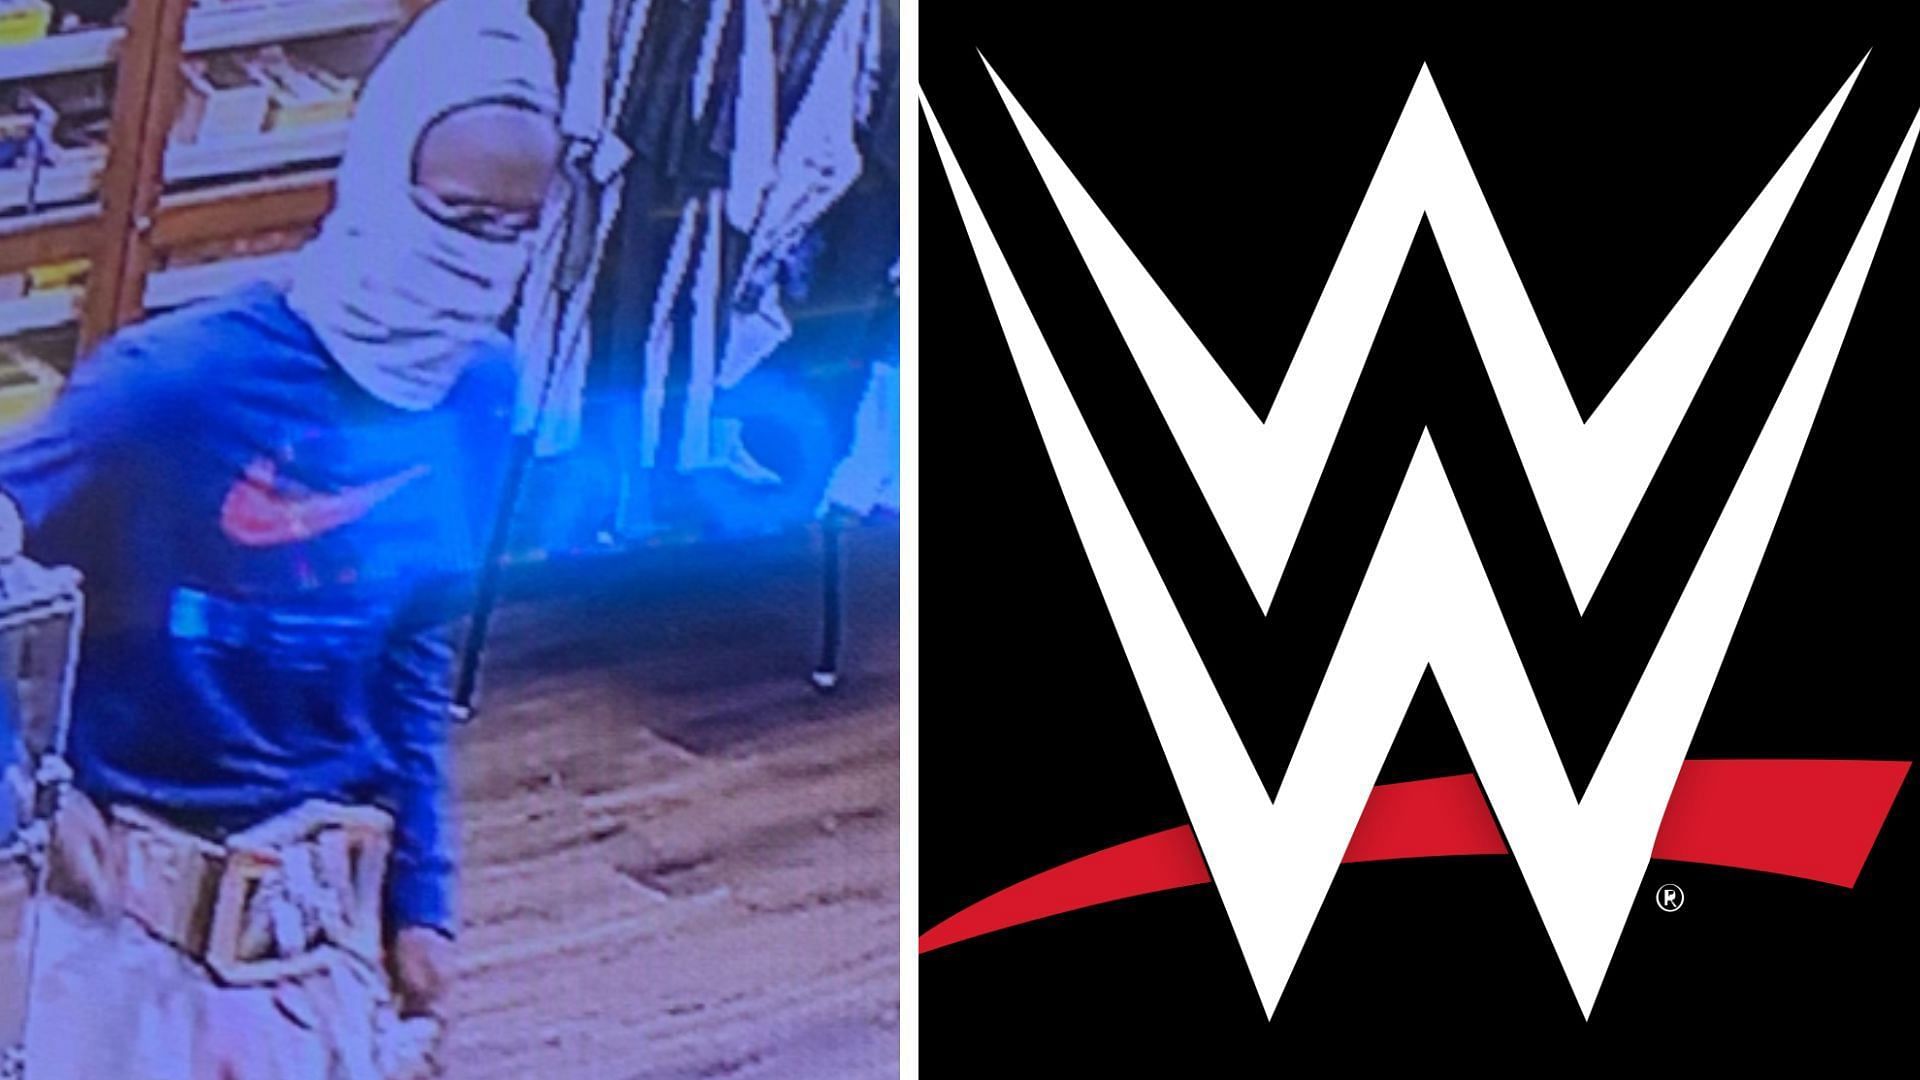 A criminal used a WWE Championship as part of his disguise during a recent theft